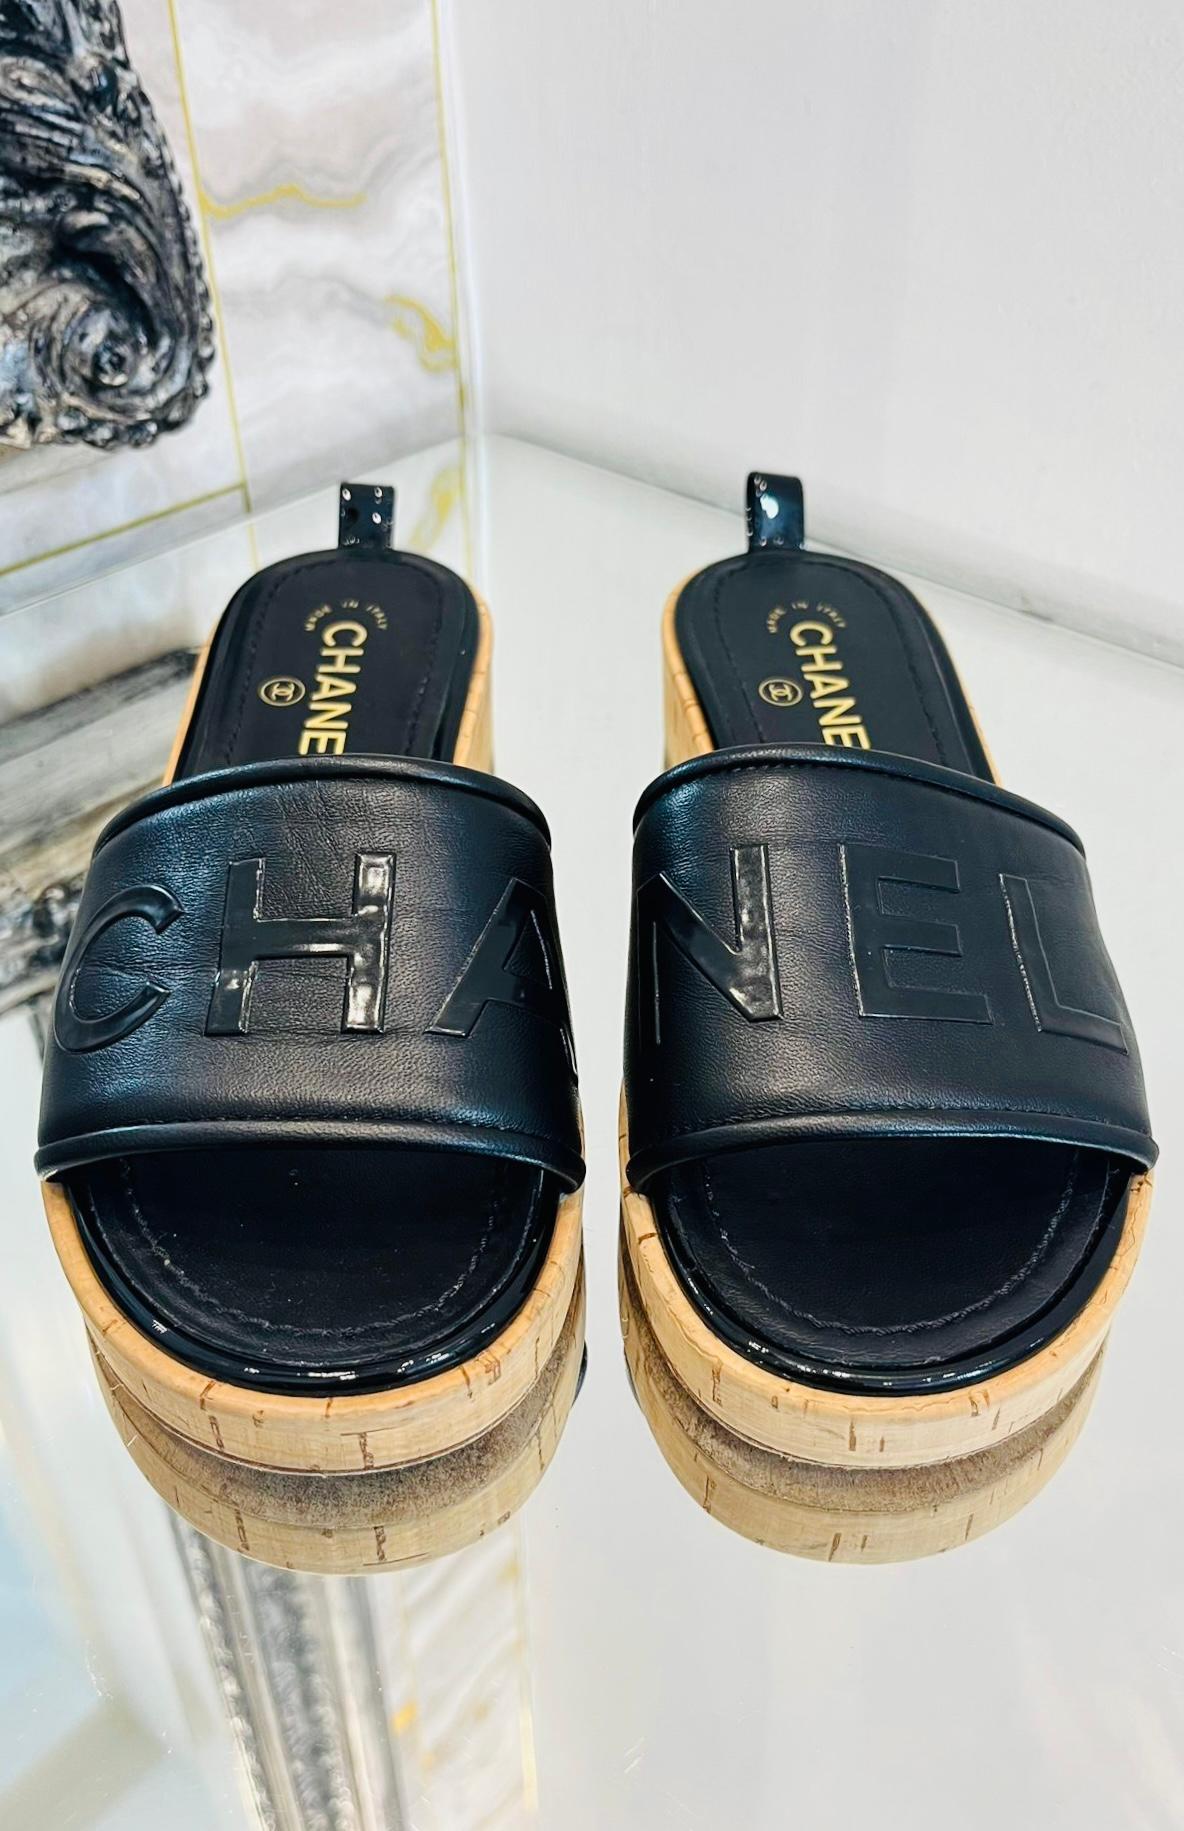 Chanel 'CC' Logo Leather Slides

Black leather uppers with stitched wording 'CHANEL'.

Cork style soles.

Size - 38

Condition - Very Good

Composition - Leather

Comes With - Dust Bags